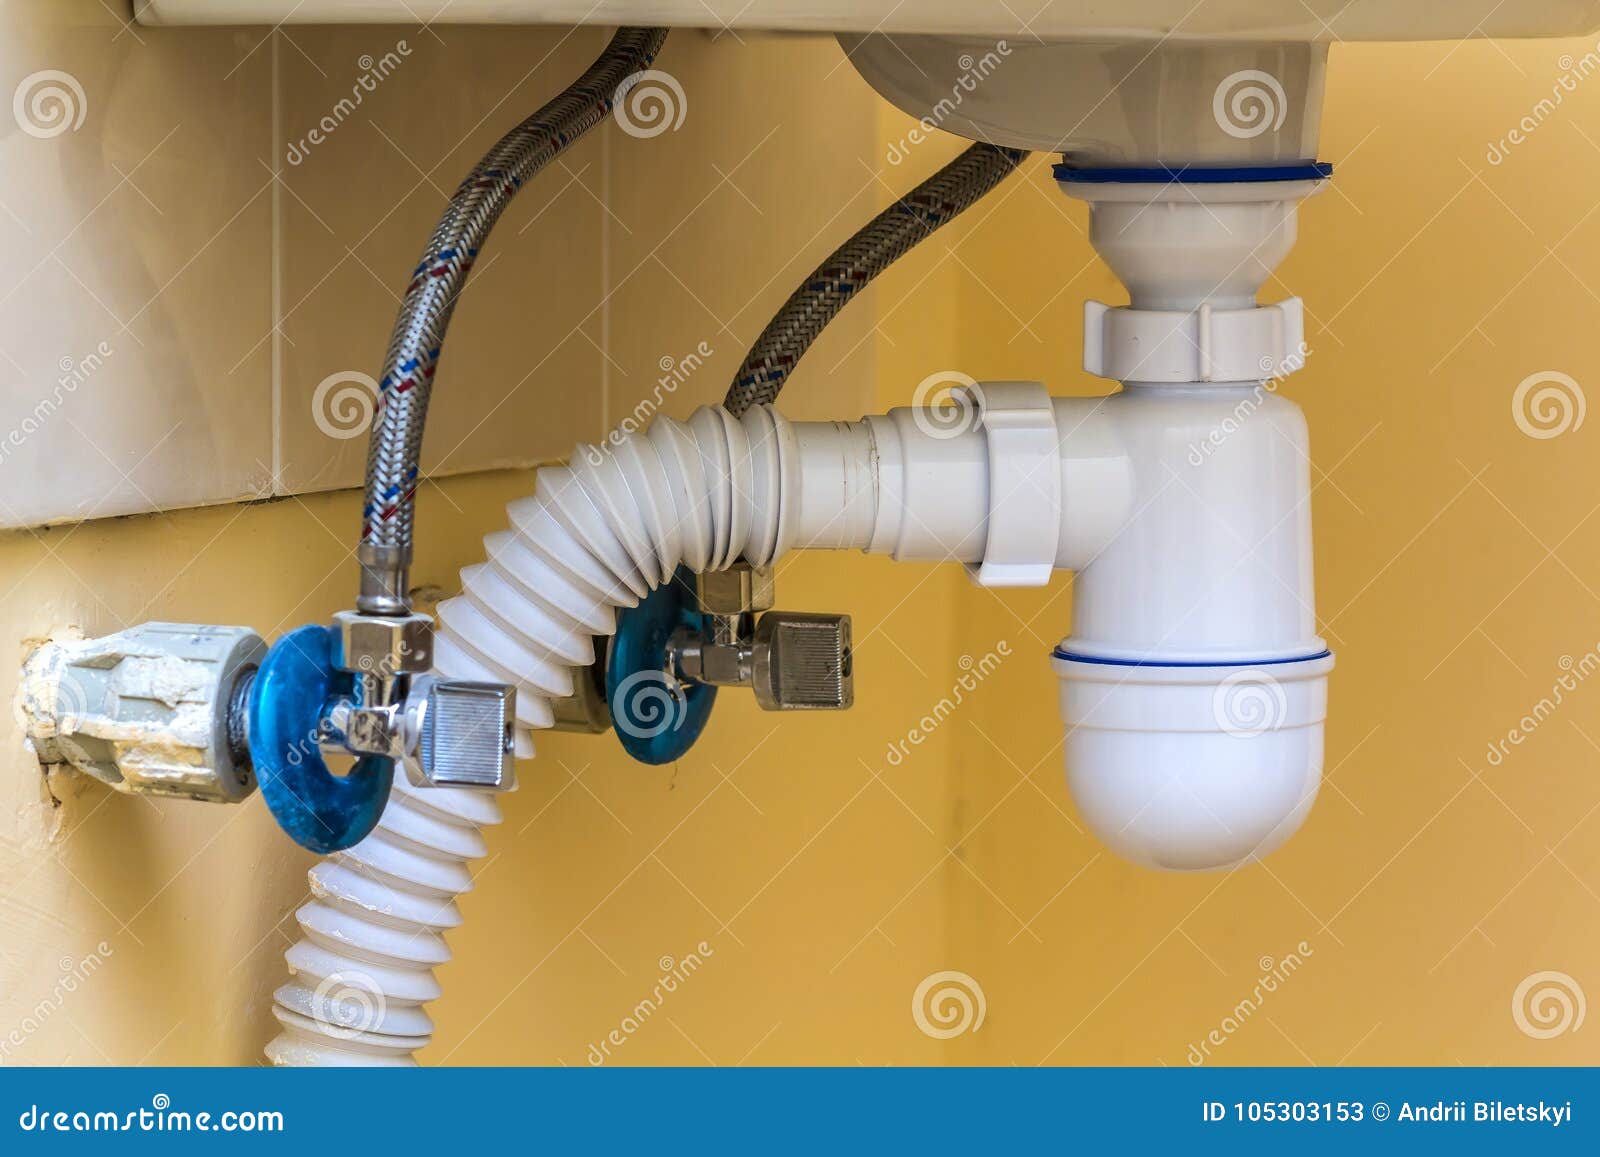 Sewer Drain Pipes Under The Kitchen Sinkplumbing Fixture And Fa Stock Image Image Of Kitchen